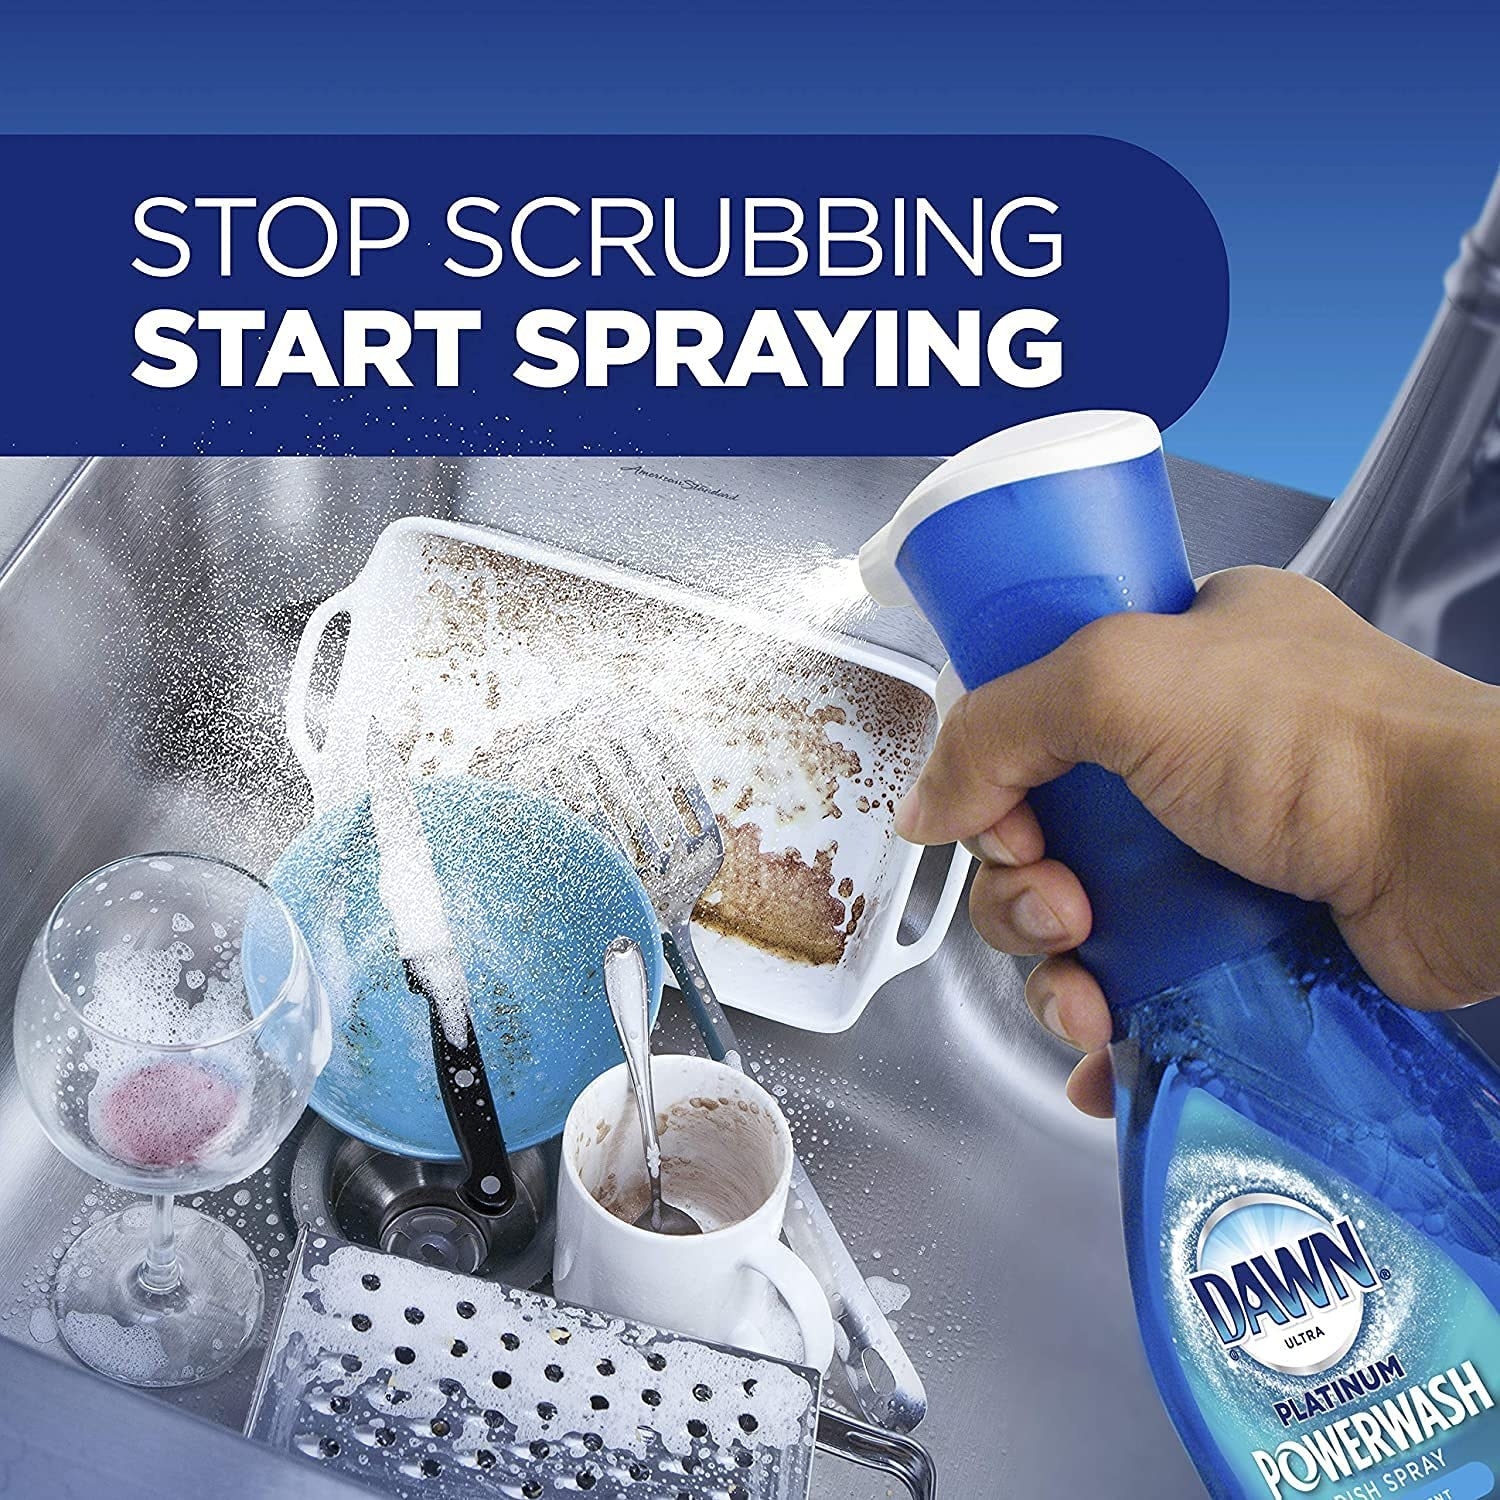 A model spraying the soap on a sink of dishes with text stop scrubbing start spraying